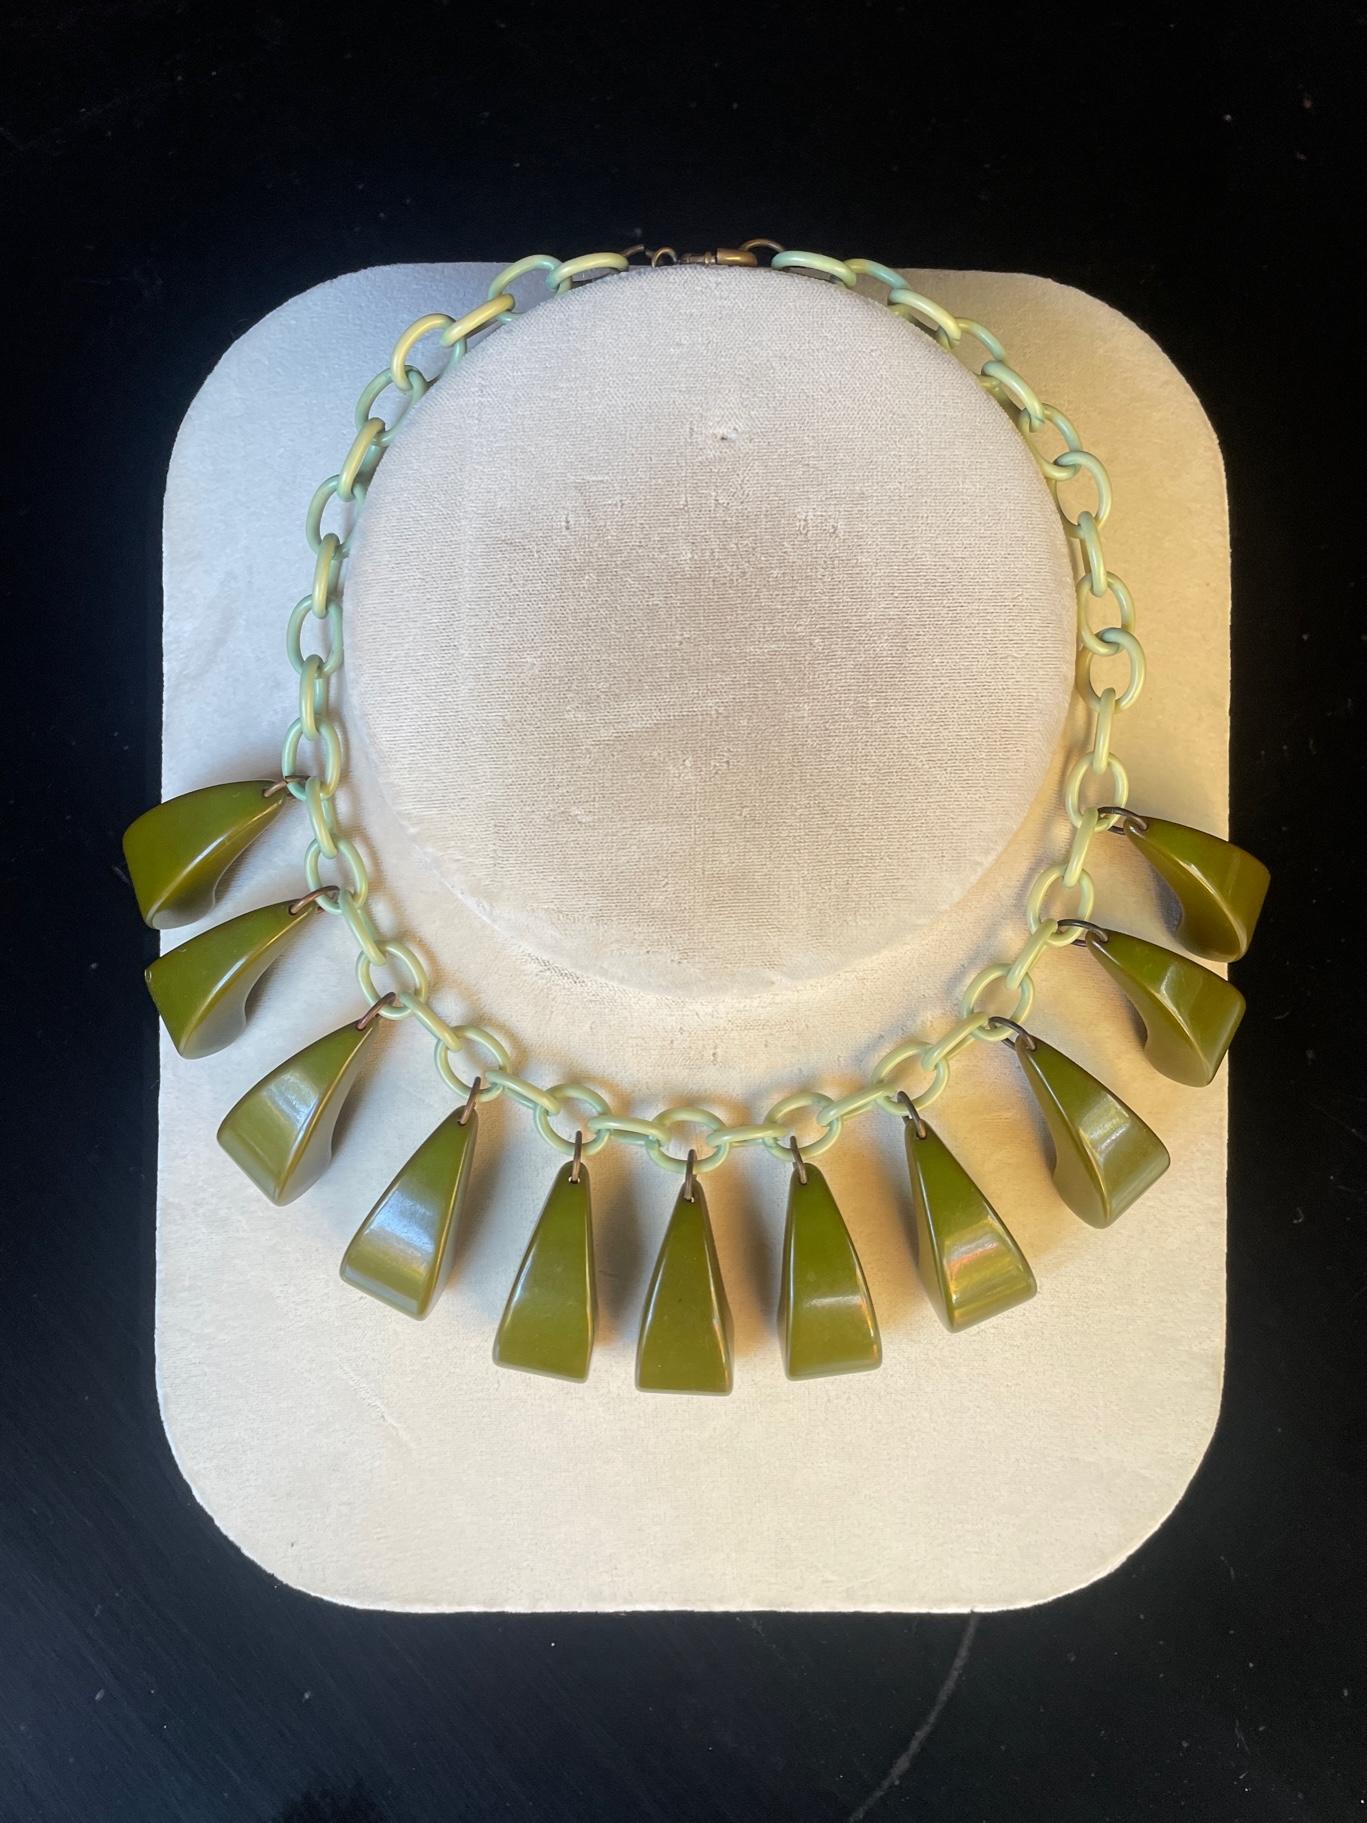 1930s Art Deco Bakelite + Celluloid Linked Necklace Dark Green Arching Dangles For Sale 2